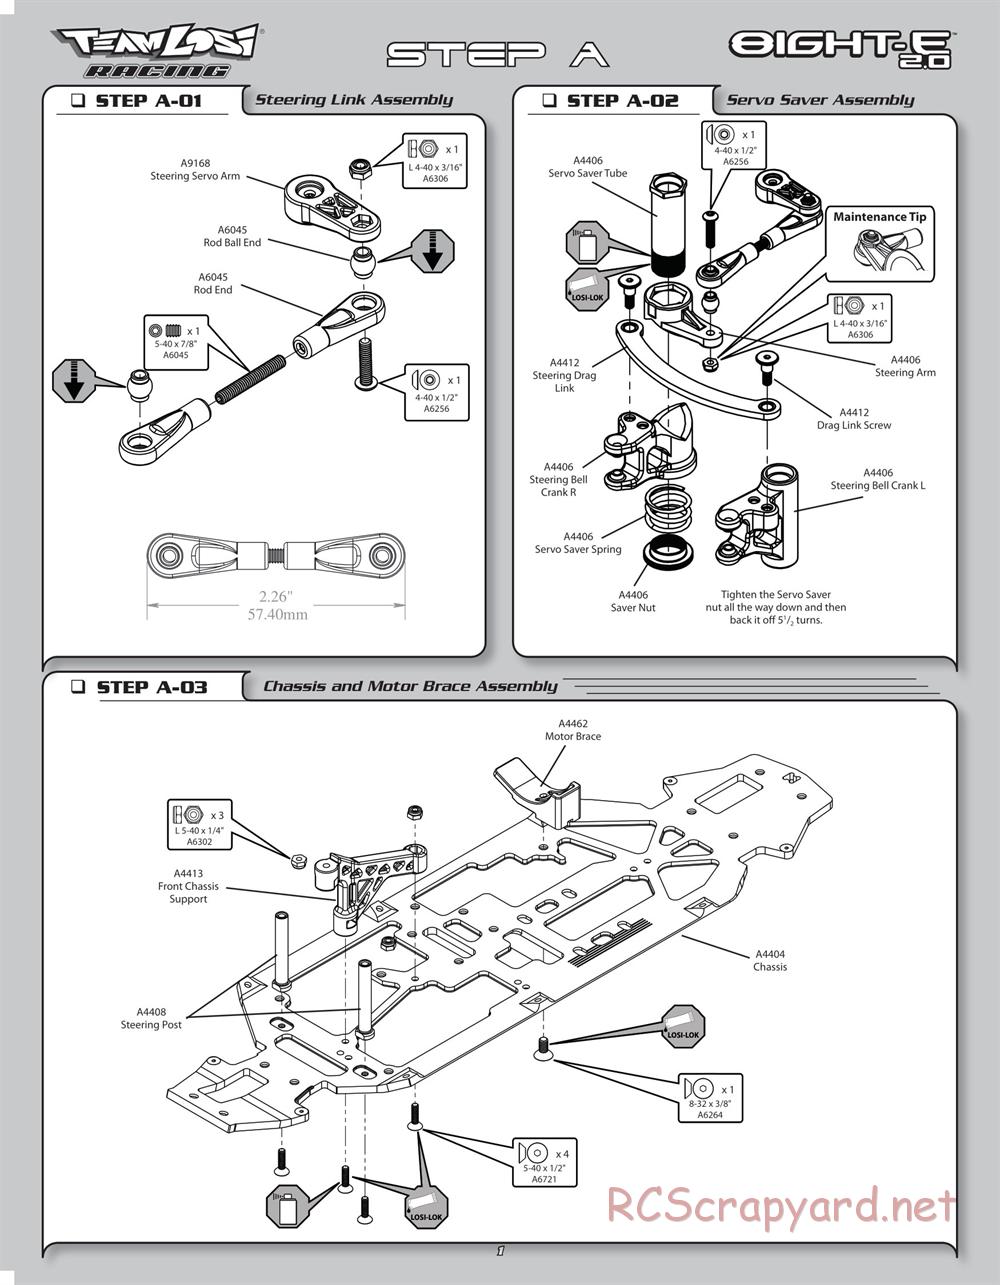 Team Losi - 8ight-E 2.0 Race Roller - Manual - Page 4